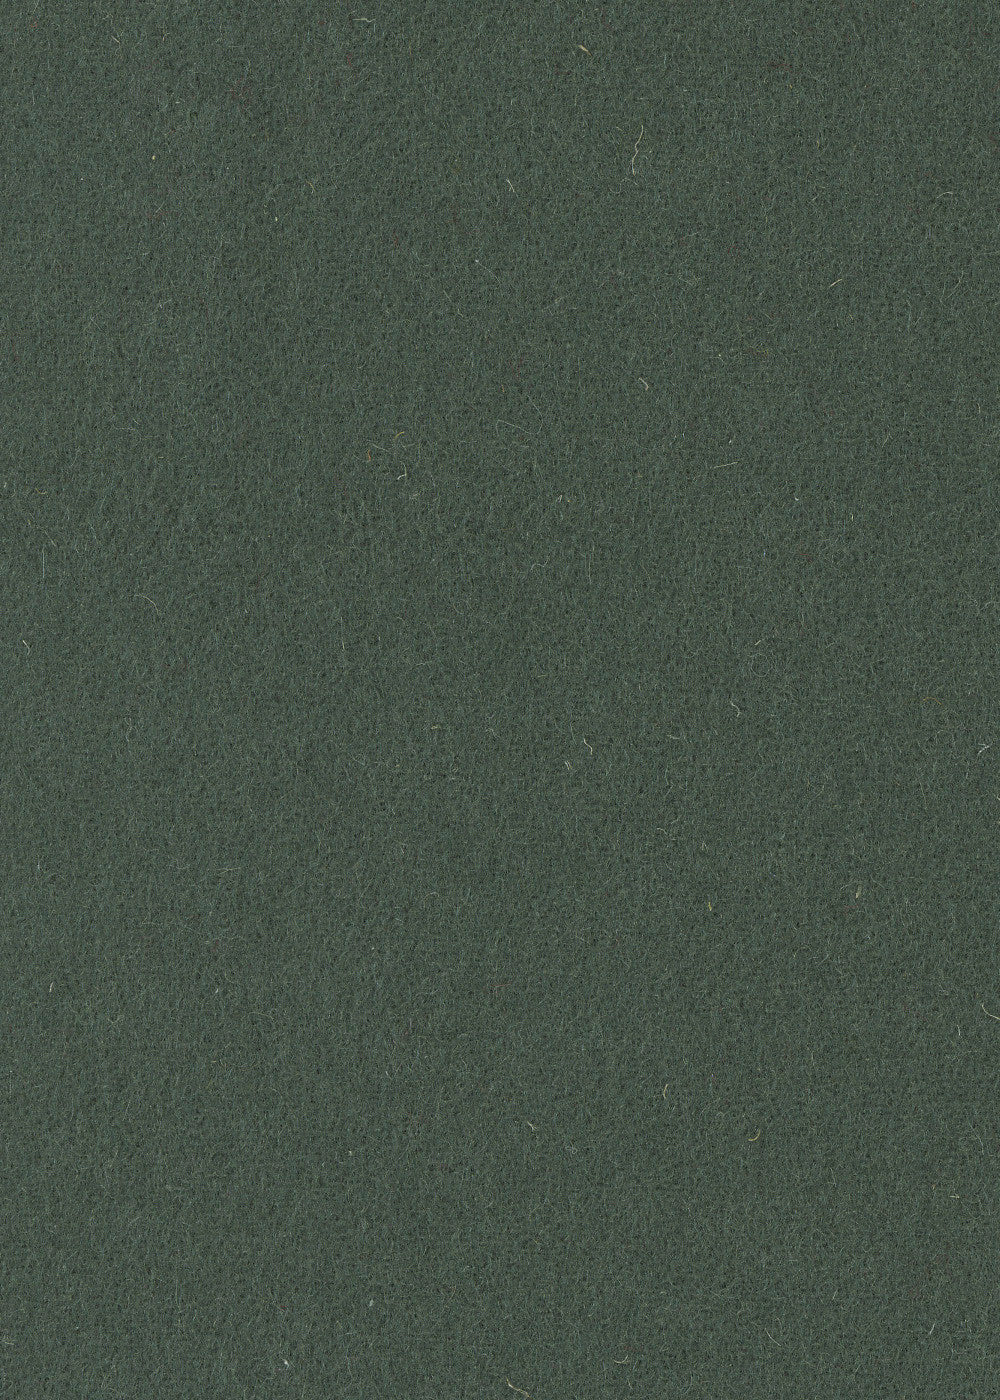 hunter green cashmere wool fabric for upholstery